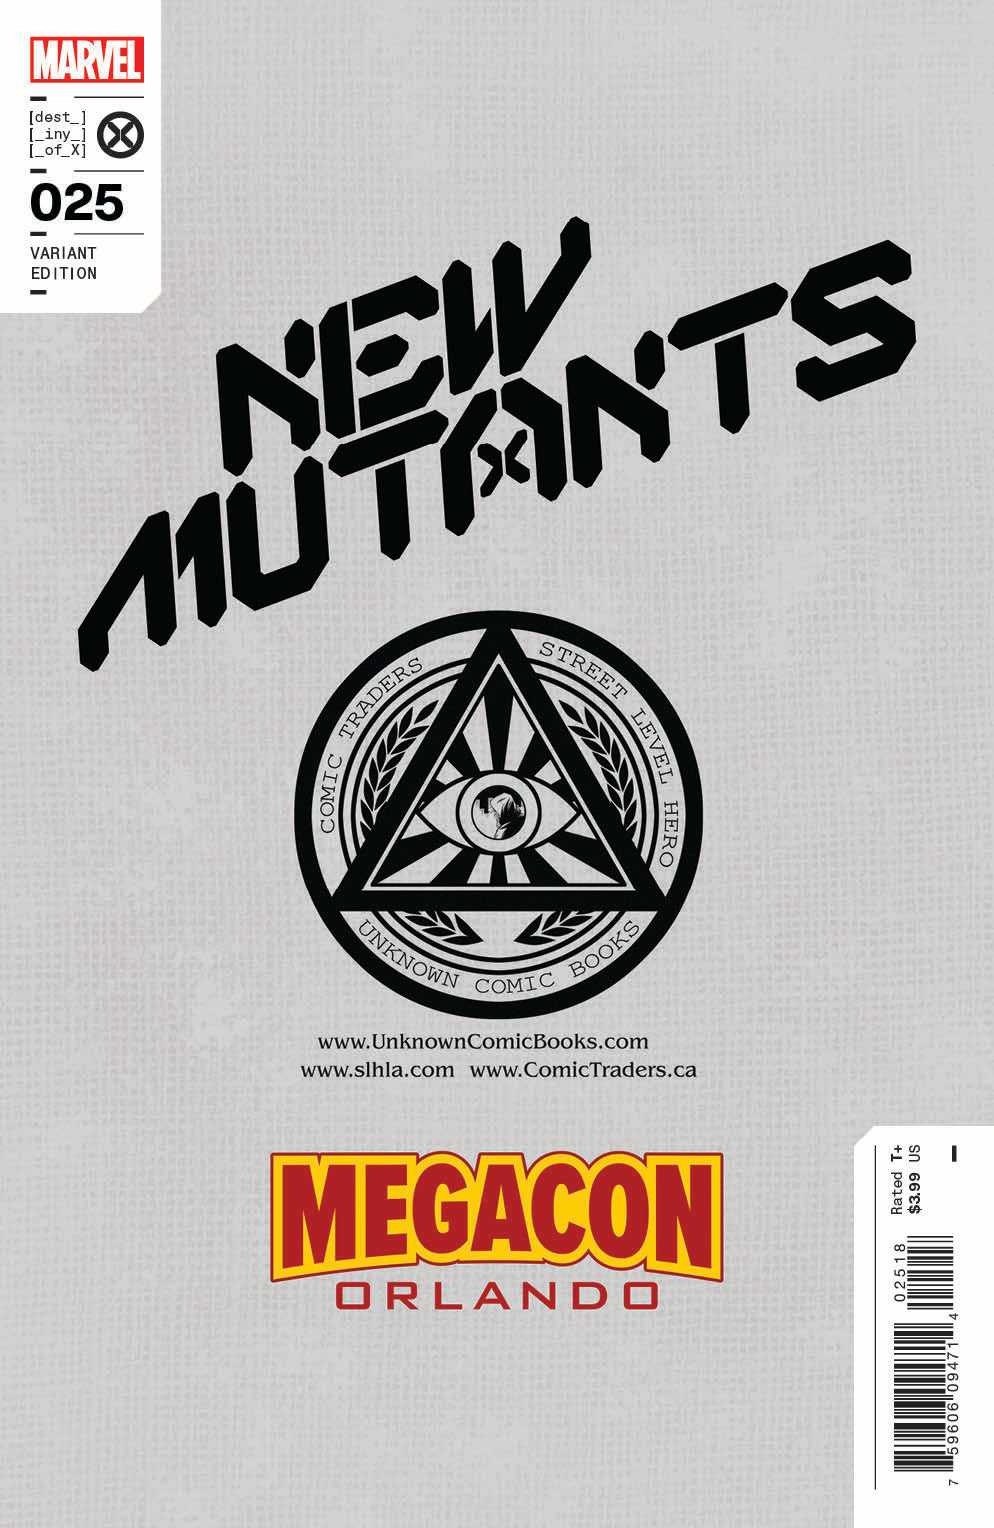 2 PACK NEW MUTANTS 25 / SAVAGE AVENGERS 1 UNKNOWN COMICS DERRICK CHEW & MICO SUAYAN EXCLUSIVE CONVENTION VAR (06/08/2022)